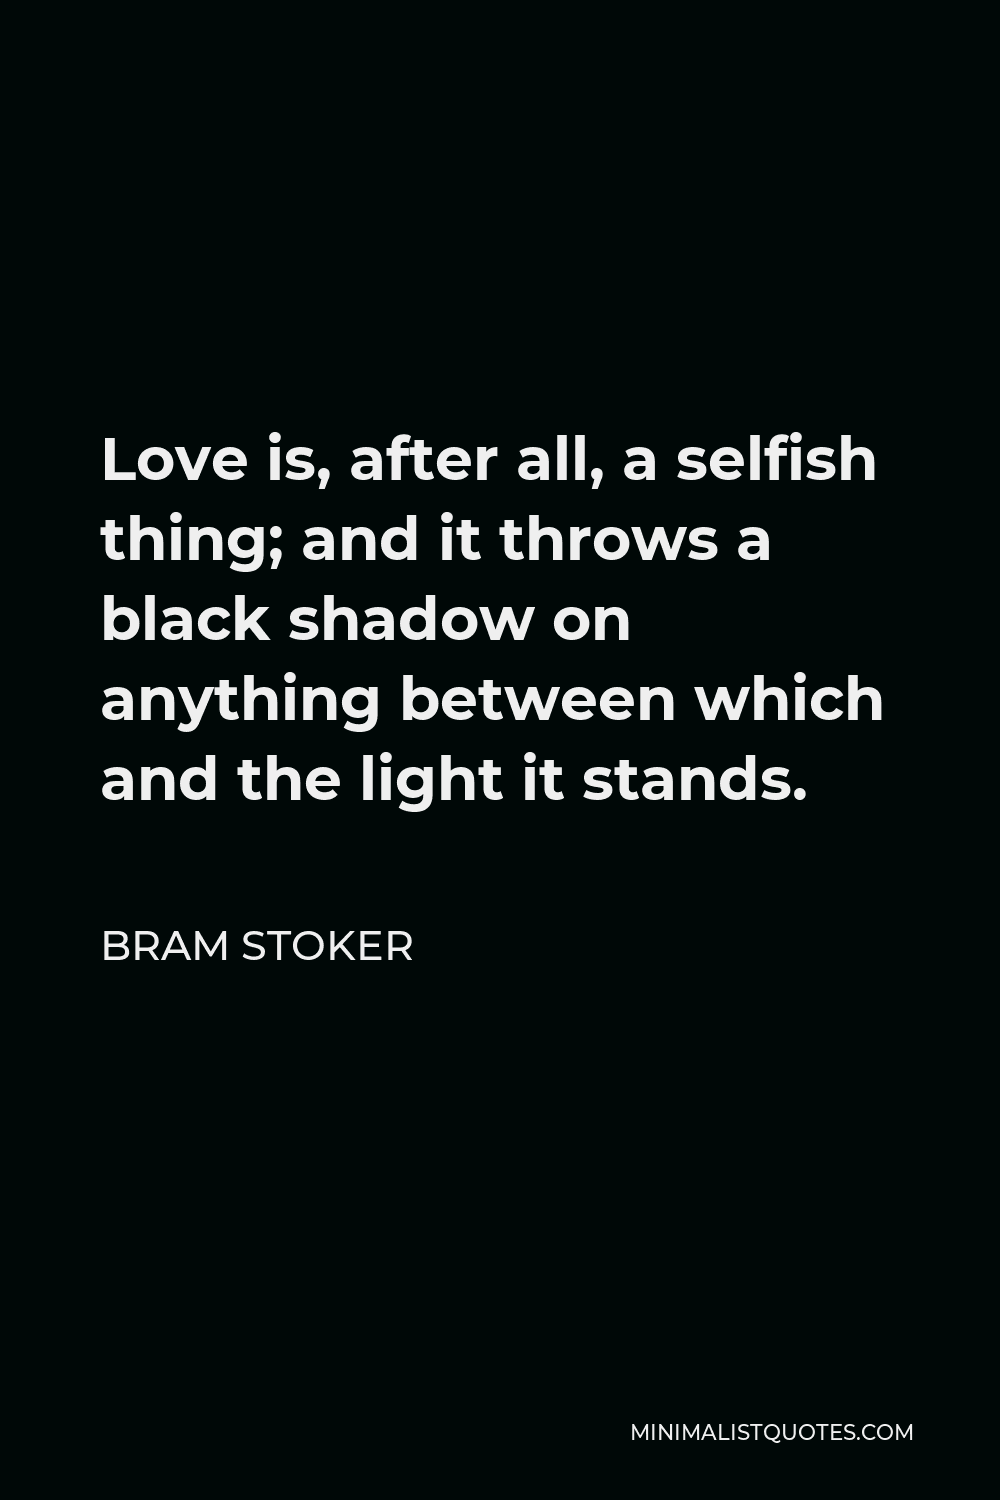 Bram Stoker Quote - Love is, after all, a selfish thing; and it throws a black shadow on anything between which and the light it stands.